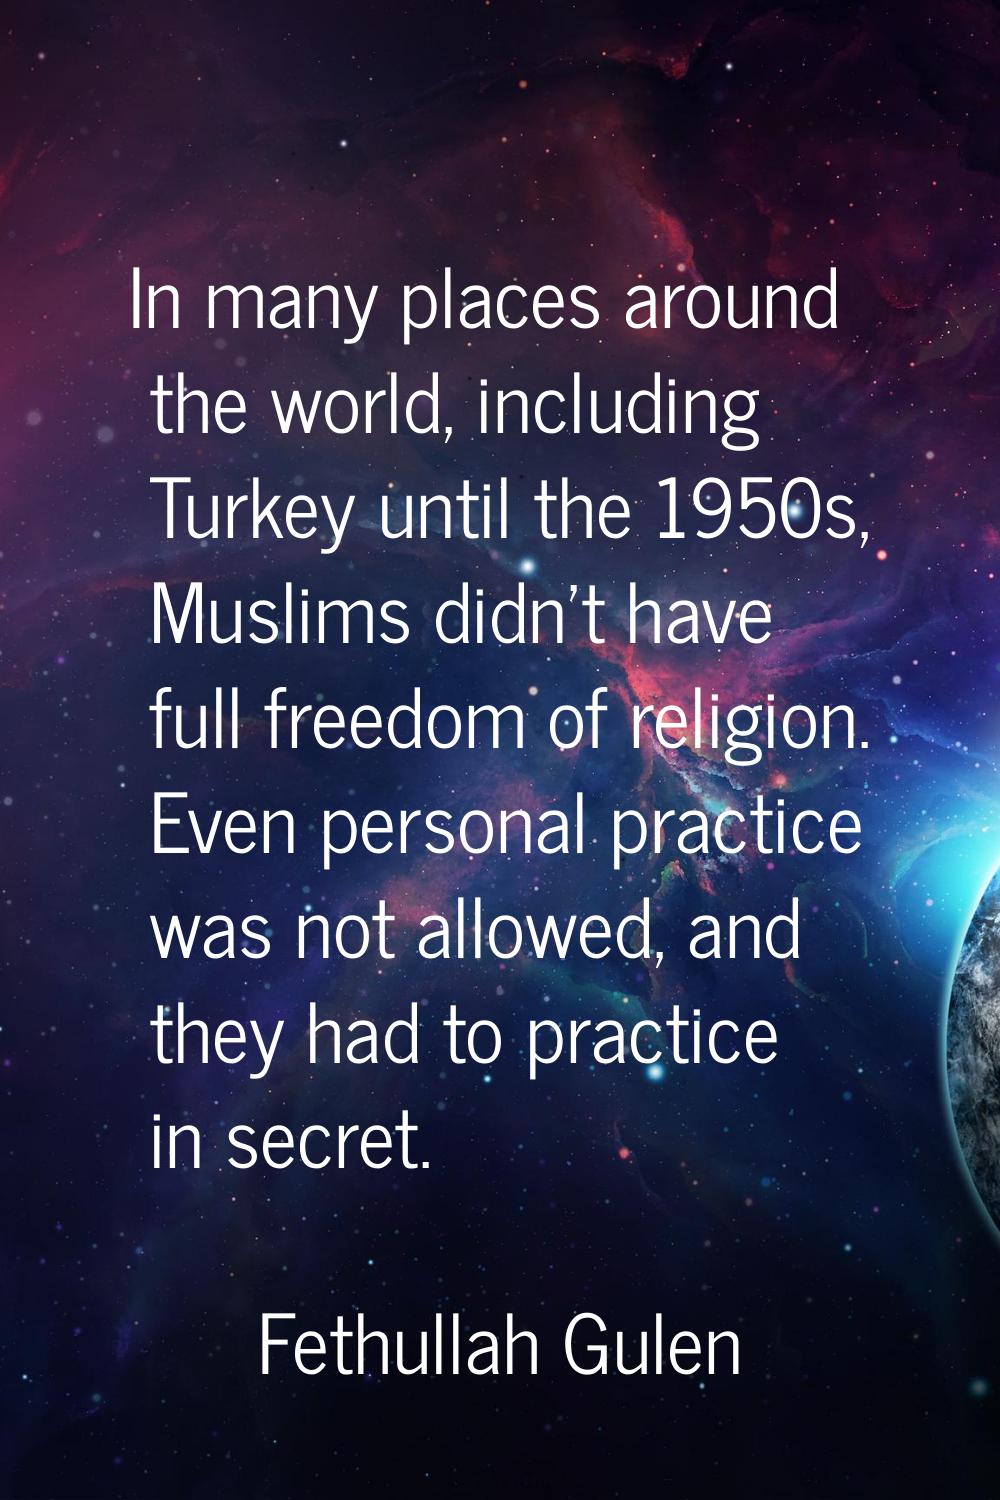 In many places around the world, including Turkey until the 1950s, Muslims didn't have full freedom